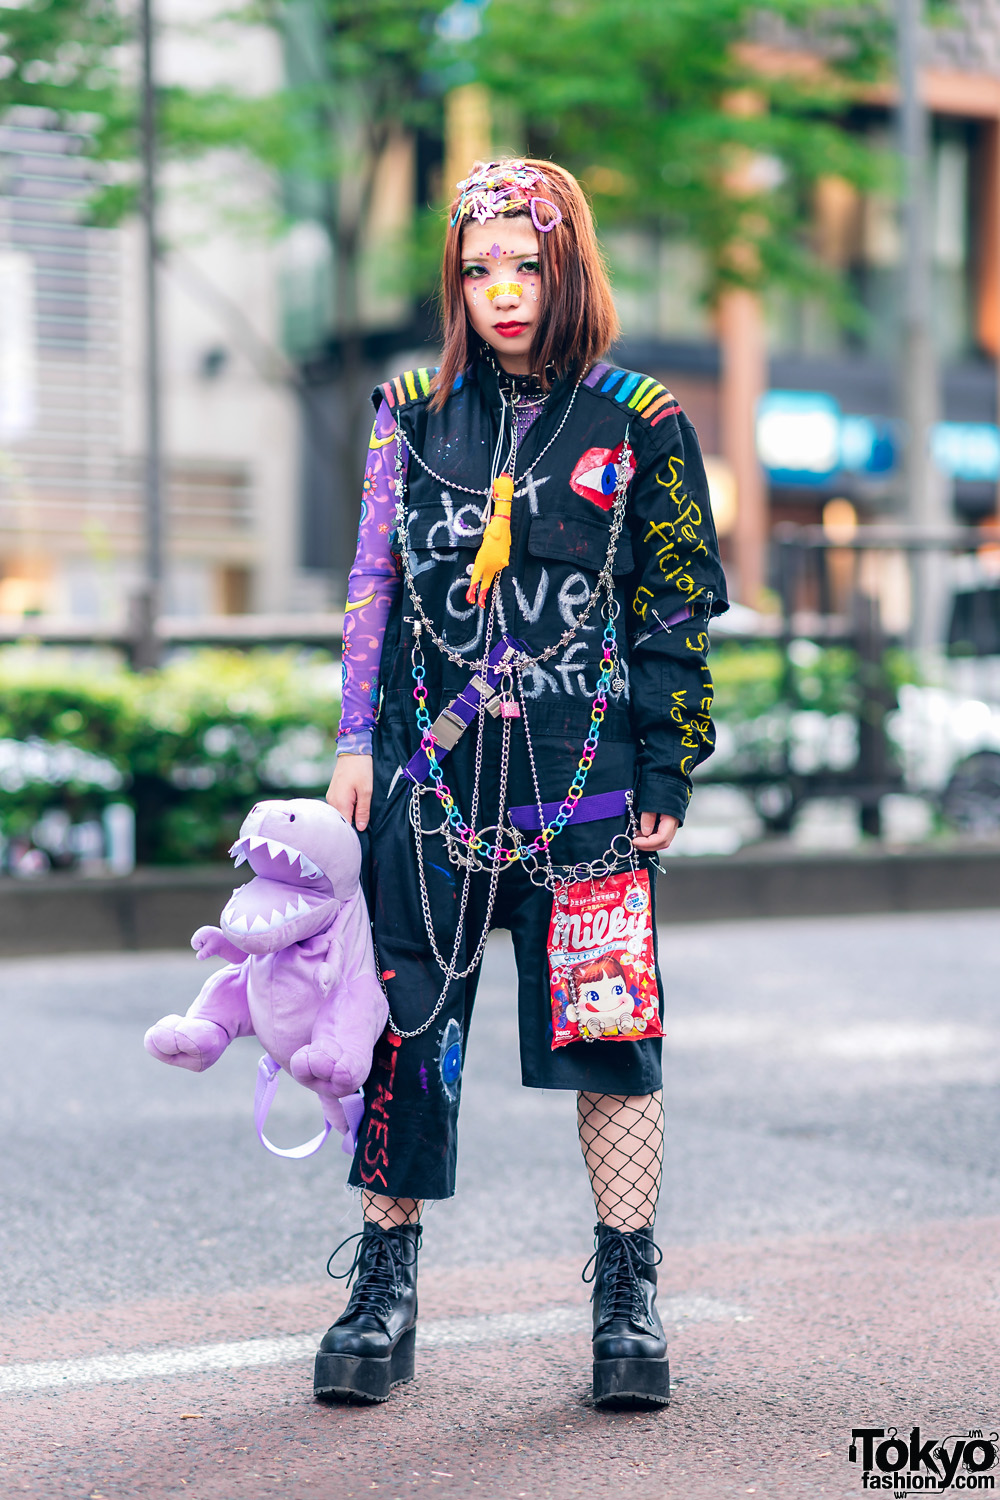 Remake Streetwear Style in Harajuku w/ Decora Hair Clips, Hand Painted Jumpsuit, Dinosaur Bag & Platform Boots